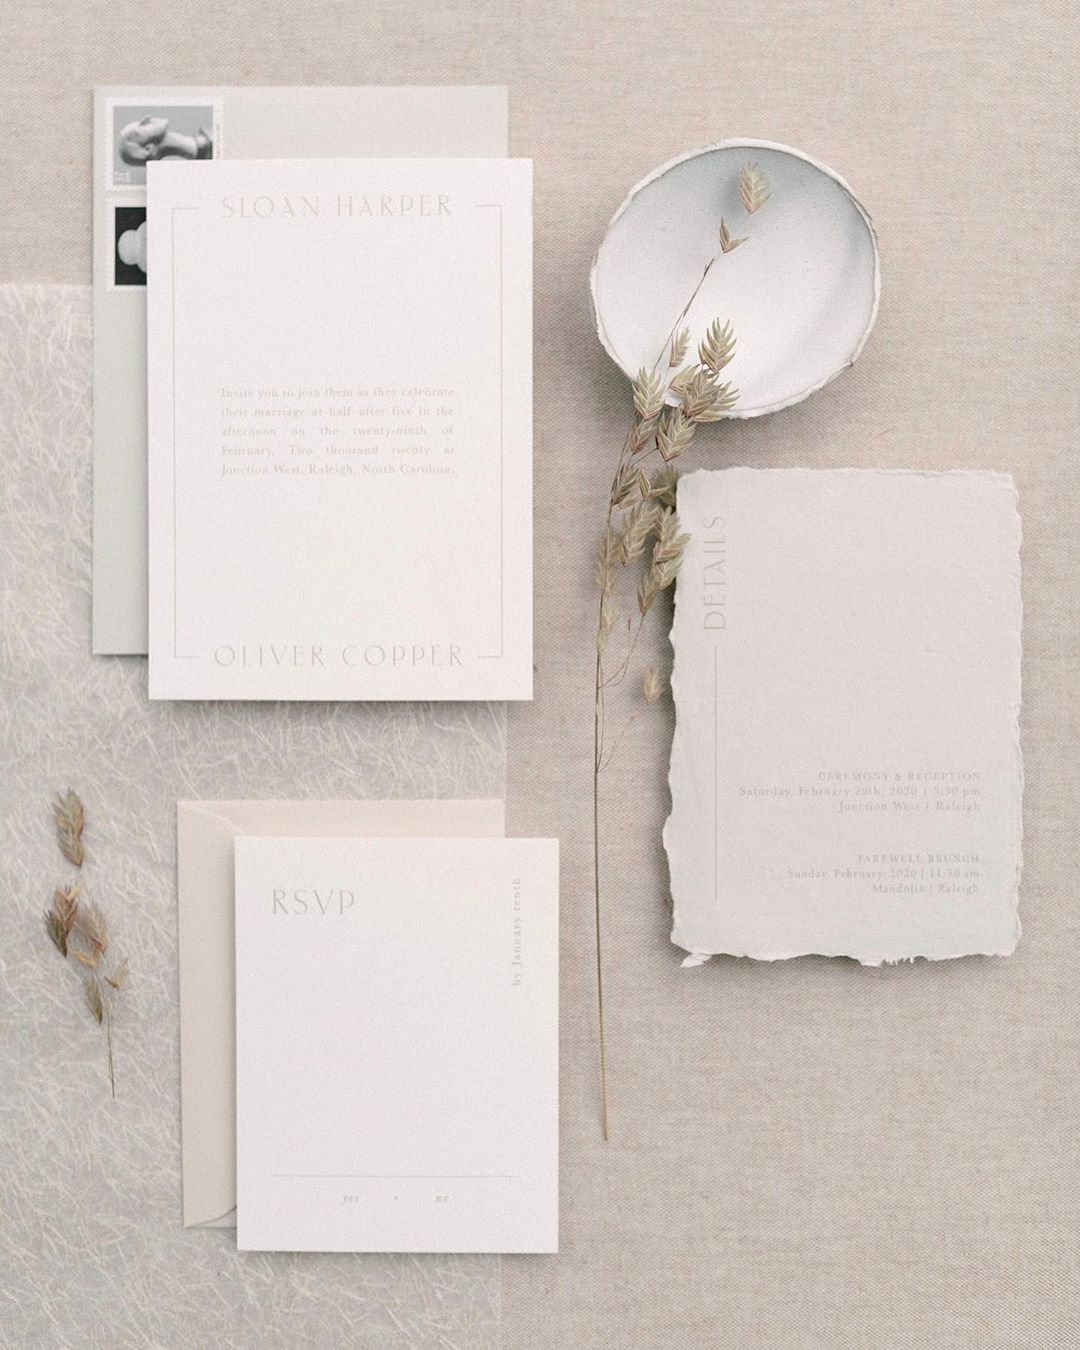 Neutral wedding invitations on deckle edge paper by Dominique Alba with photography by Radian Photography and styling by Wiley Events Co